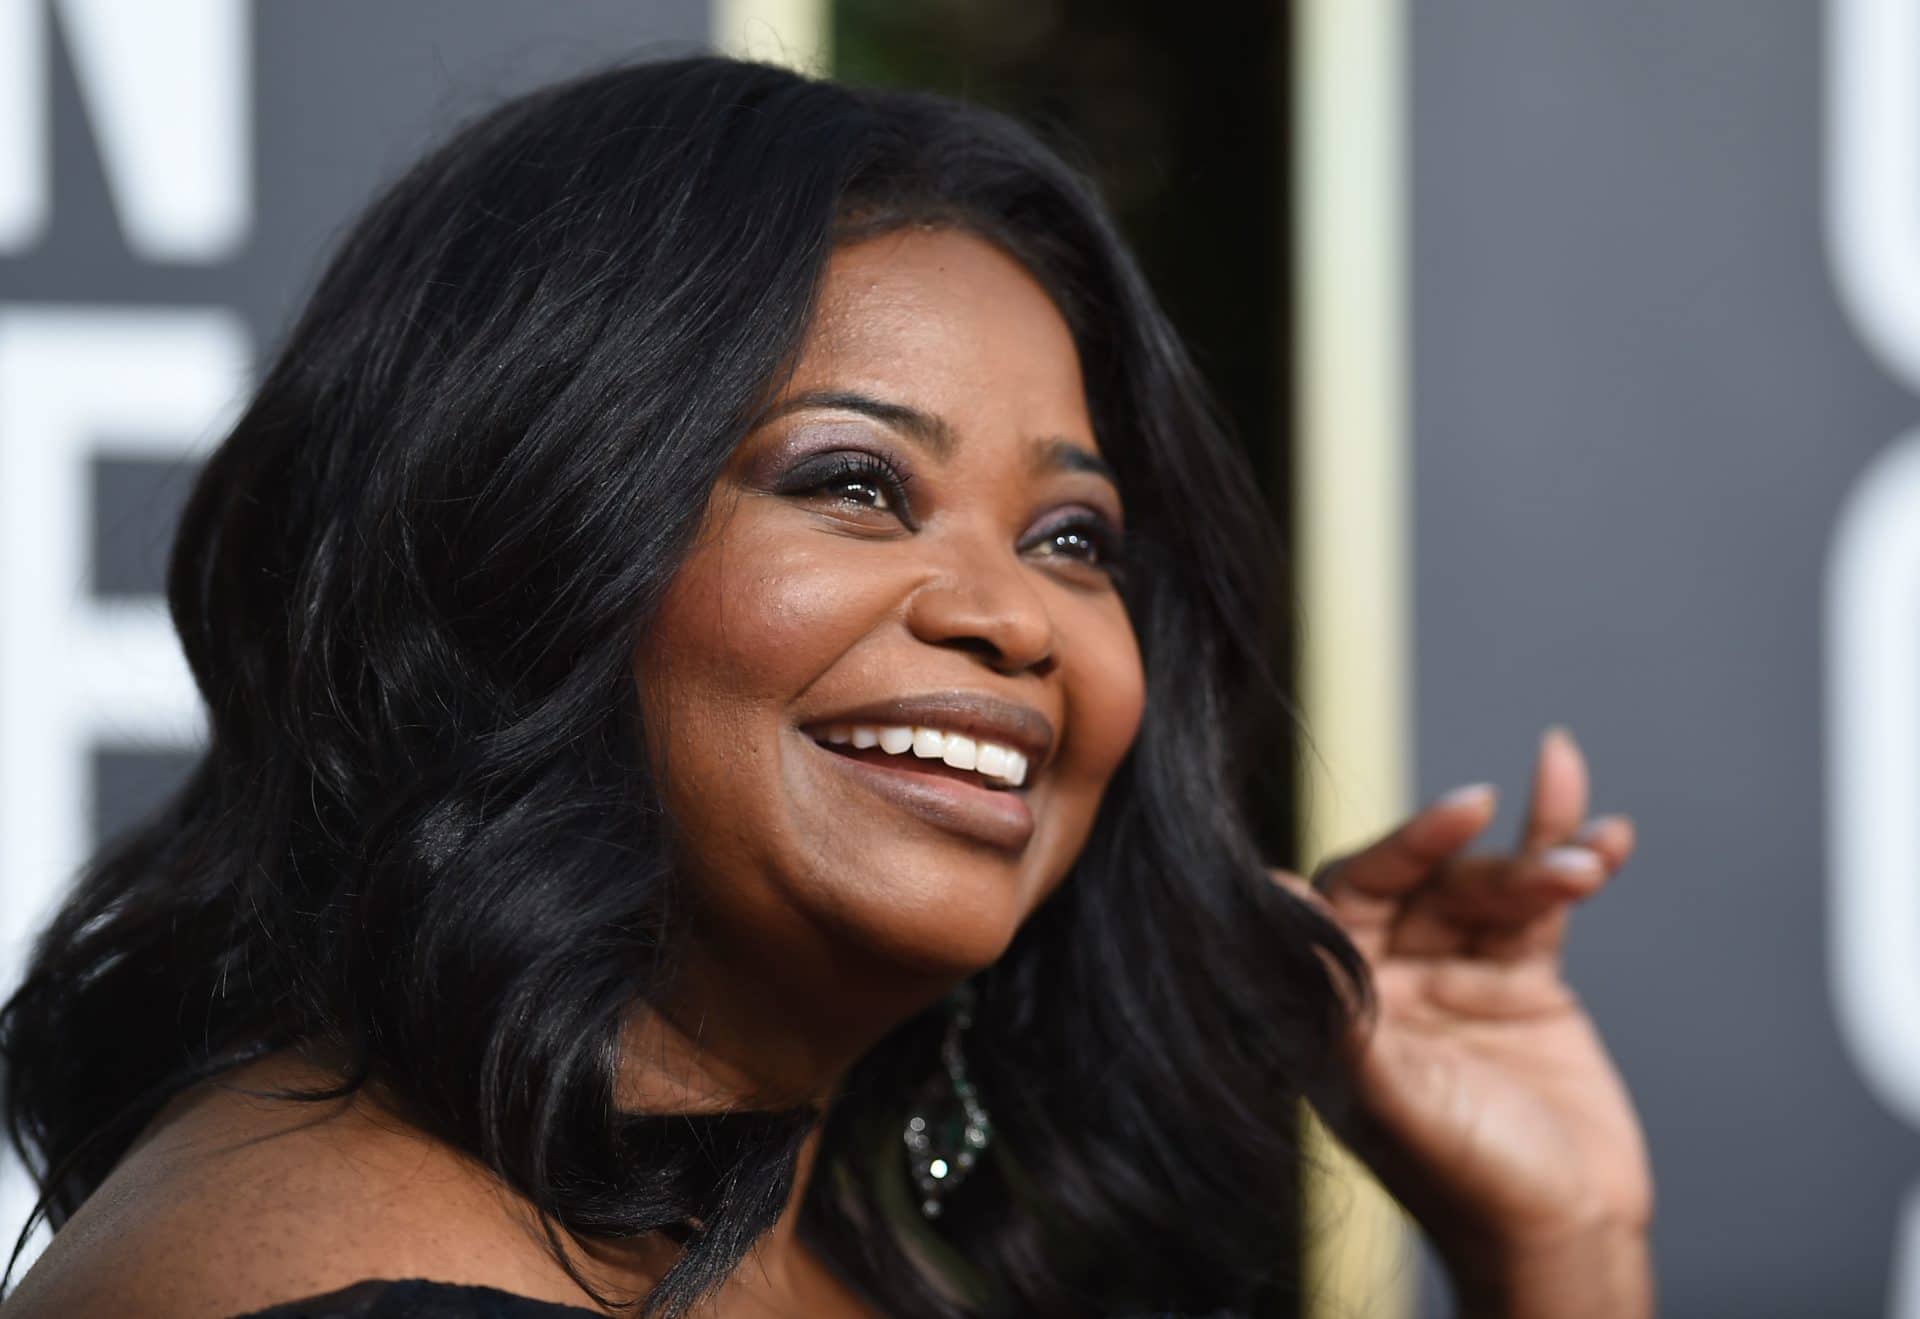 Octavia Spencer And Gabrielle Union Team Up For Adaptation Of 'Coffee Will Make You Black'